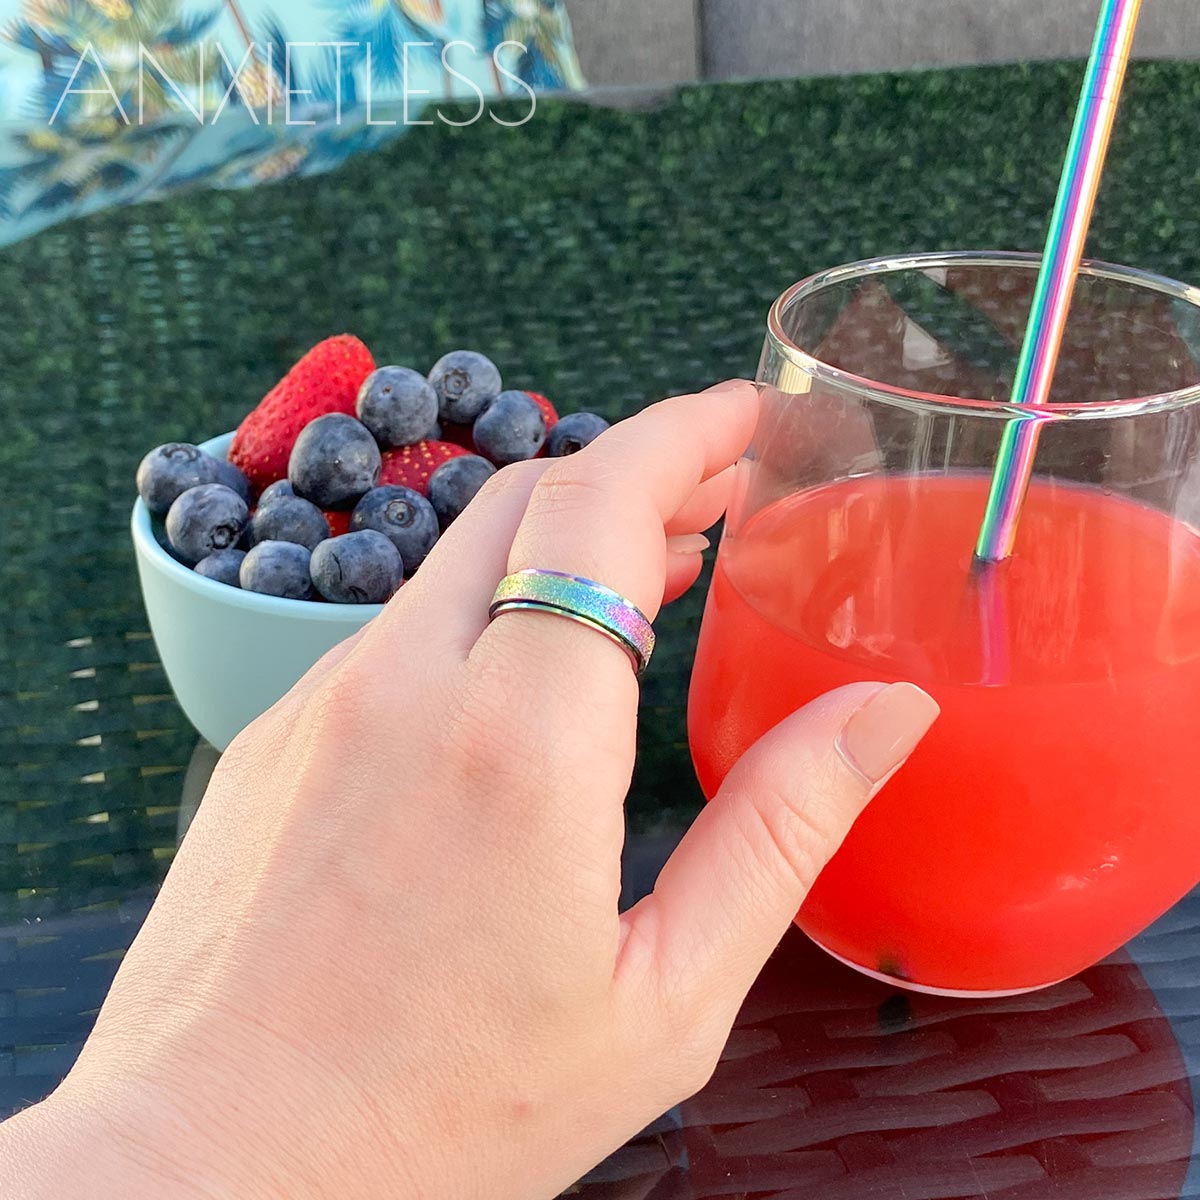 Woman wearing rainbow anxiety ring on index finger, holding a glass with red juice and a rainbow straw. In the background, there is a blue bowl with strawberries and blueberries, a glass table, and a grey couch with a blue palm leaf pillow.